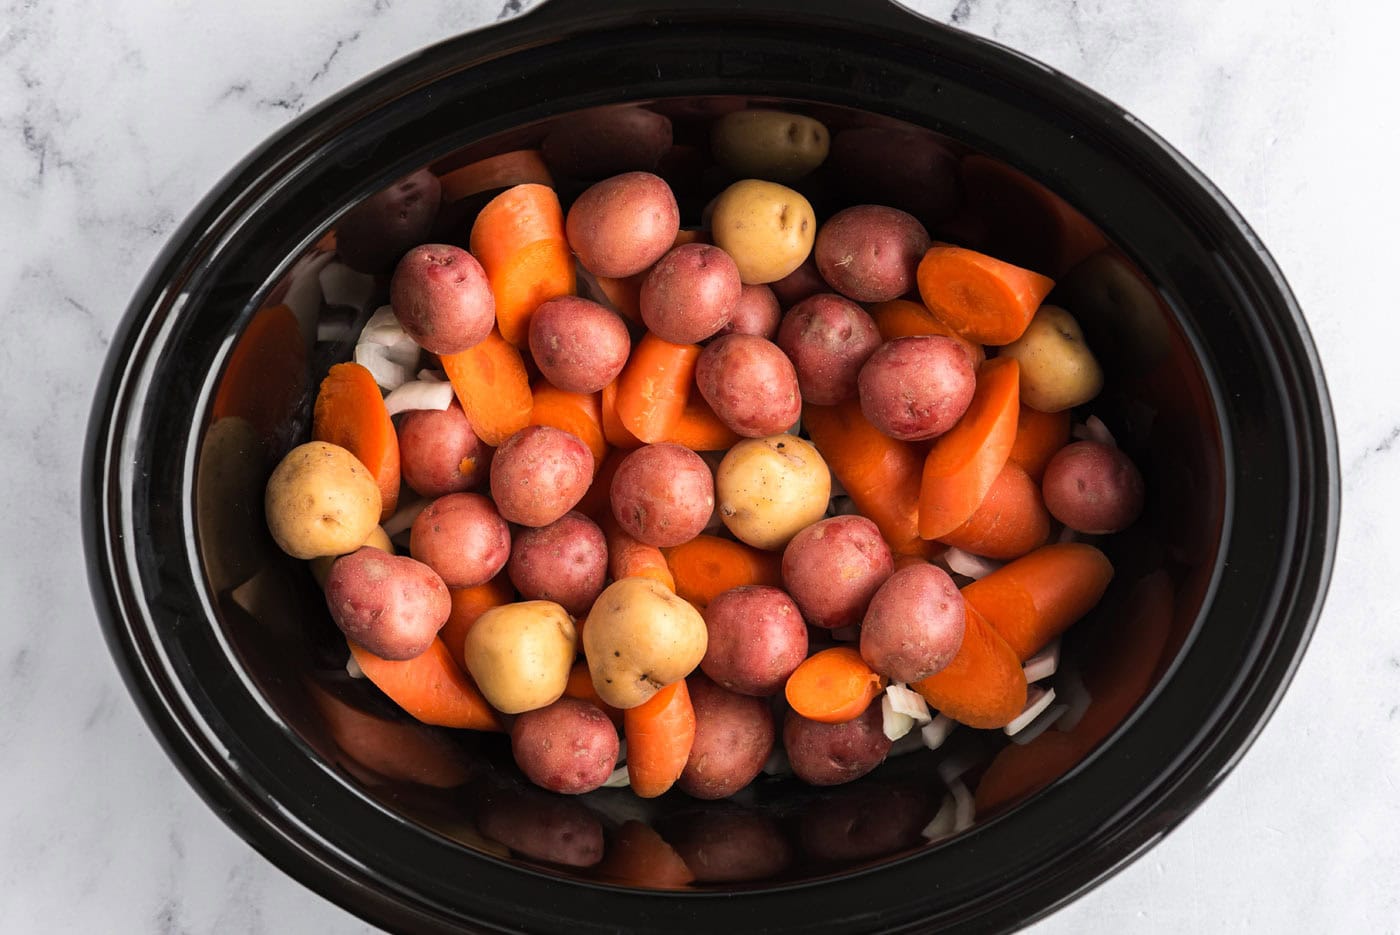 baby potatoes and carrots added on top of onions in slow cooker crock